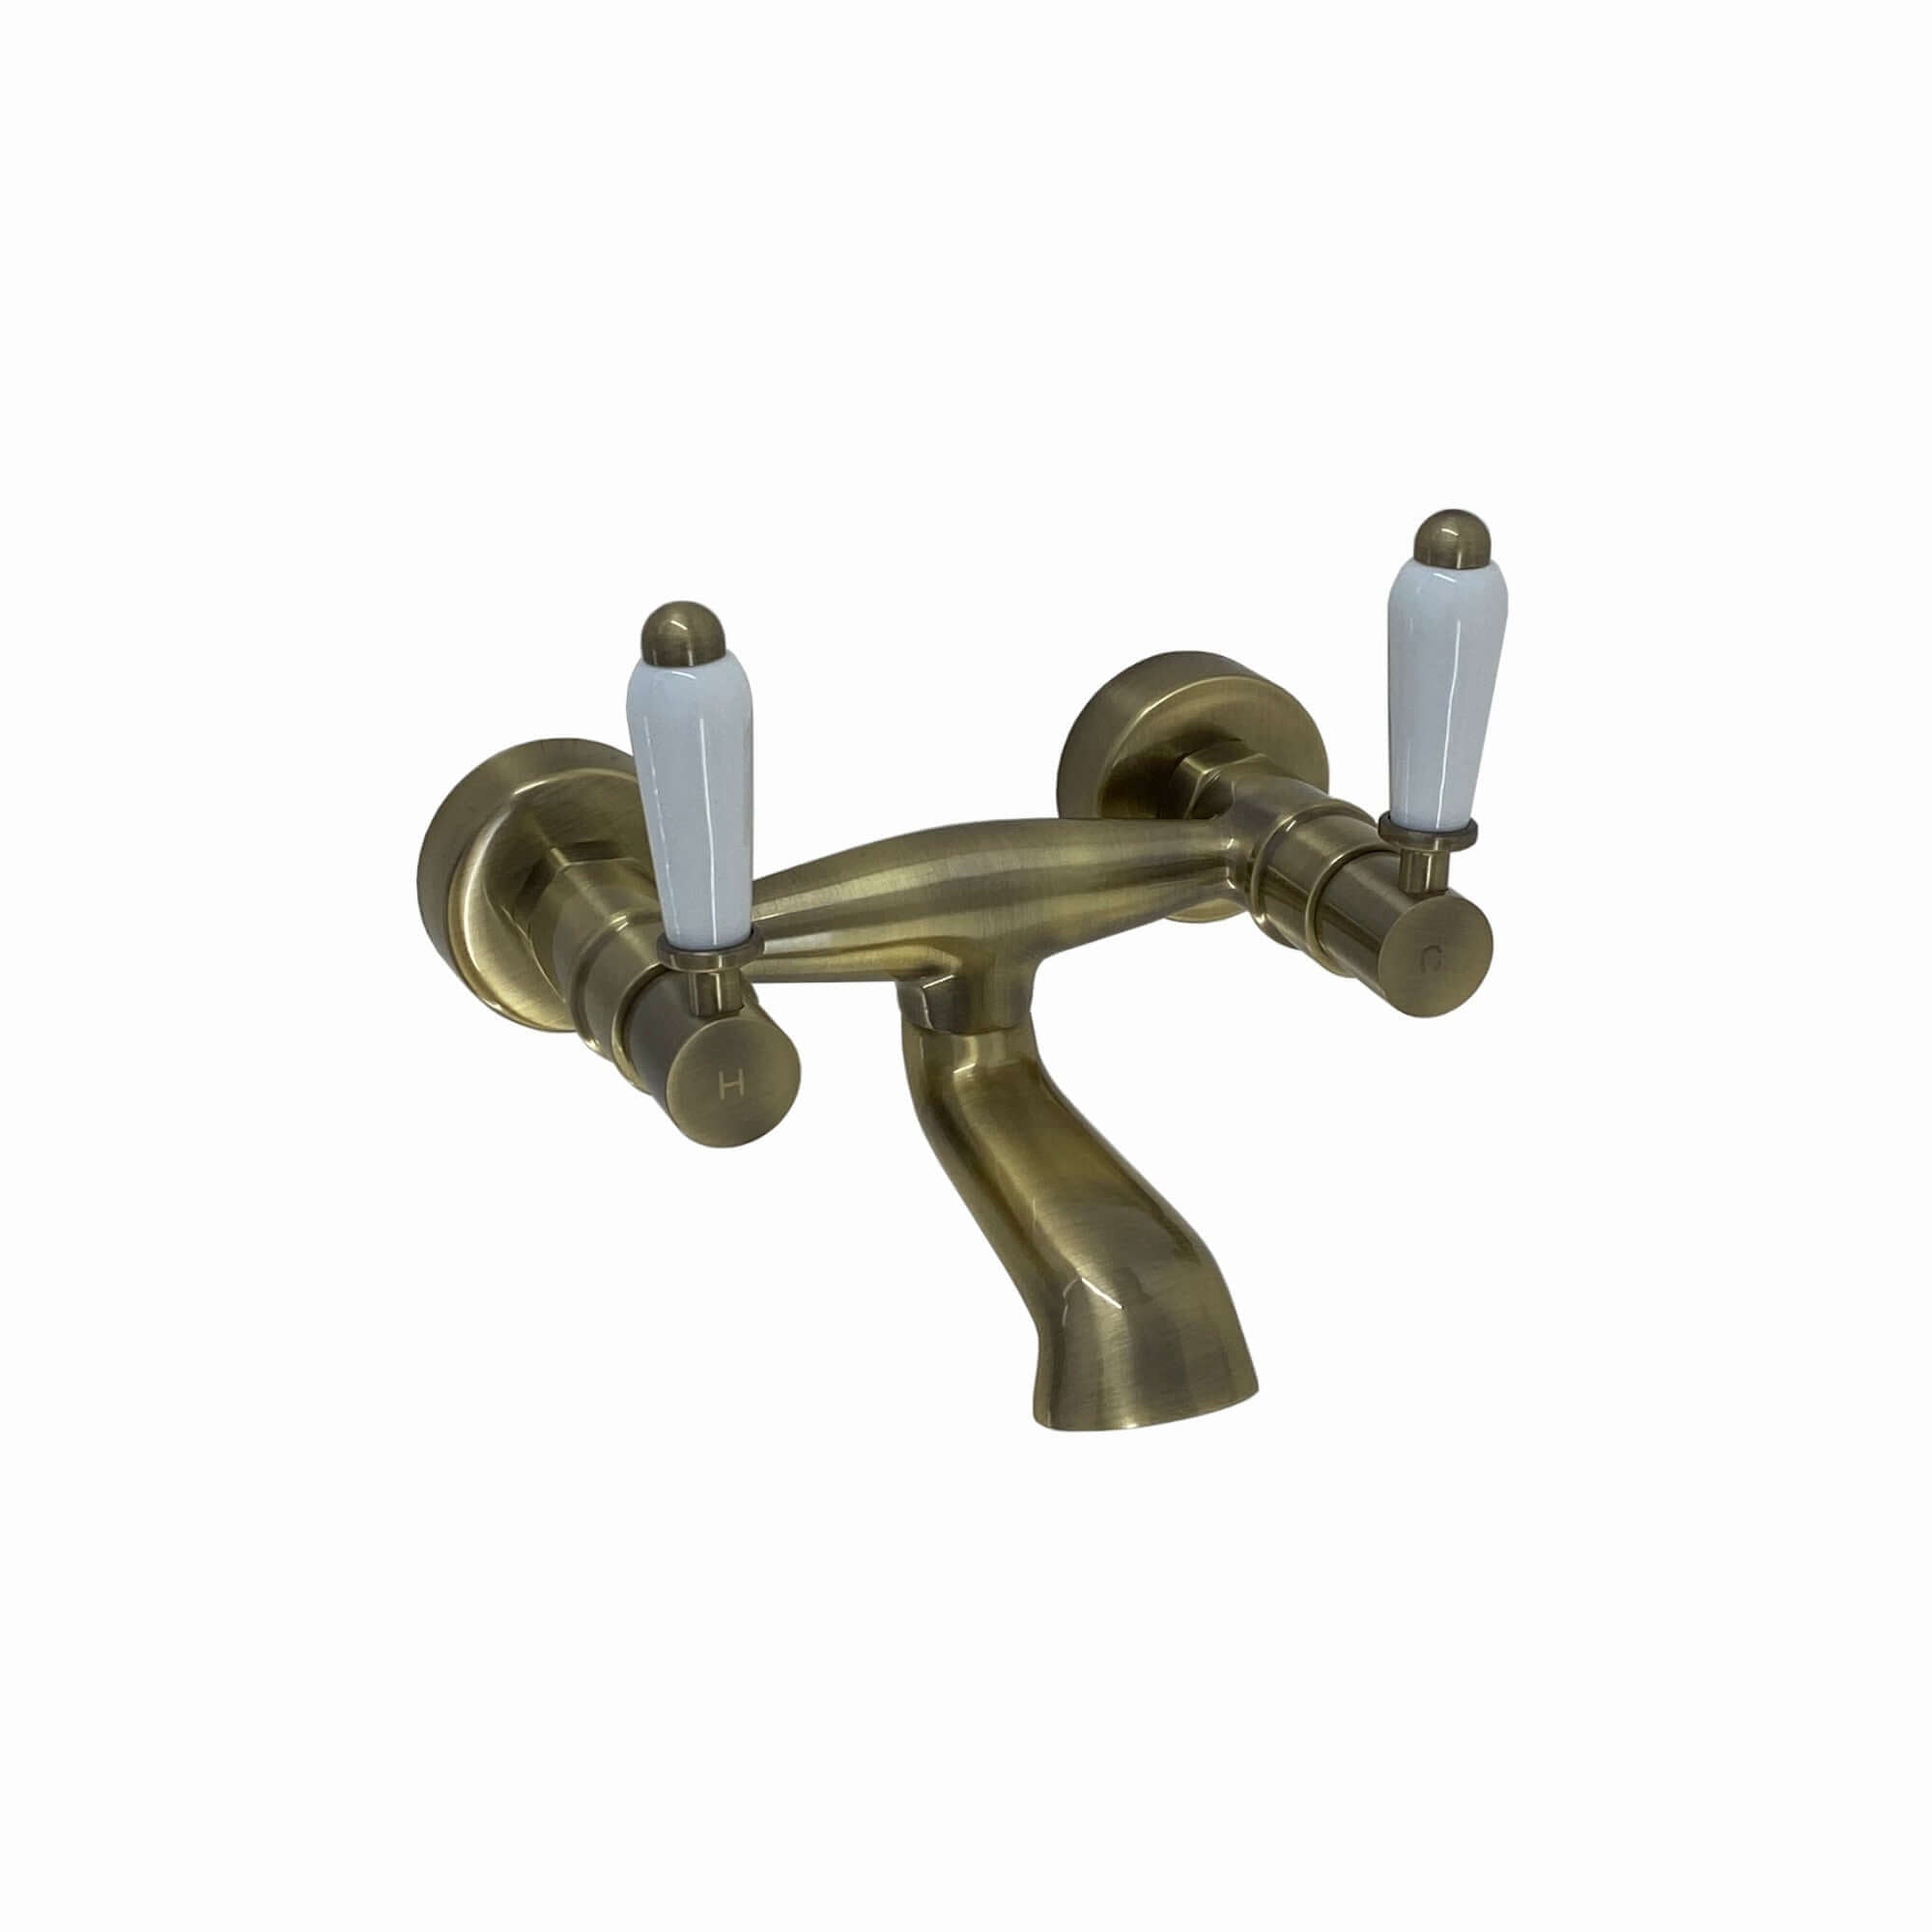 Downton wall mounted bath mixer tap with white ceramic levers - antique bronze - Taps